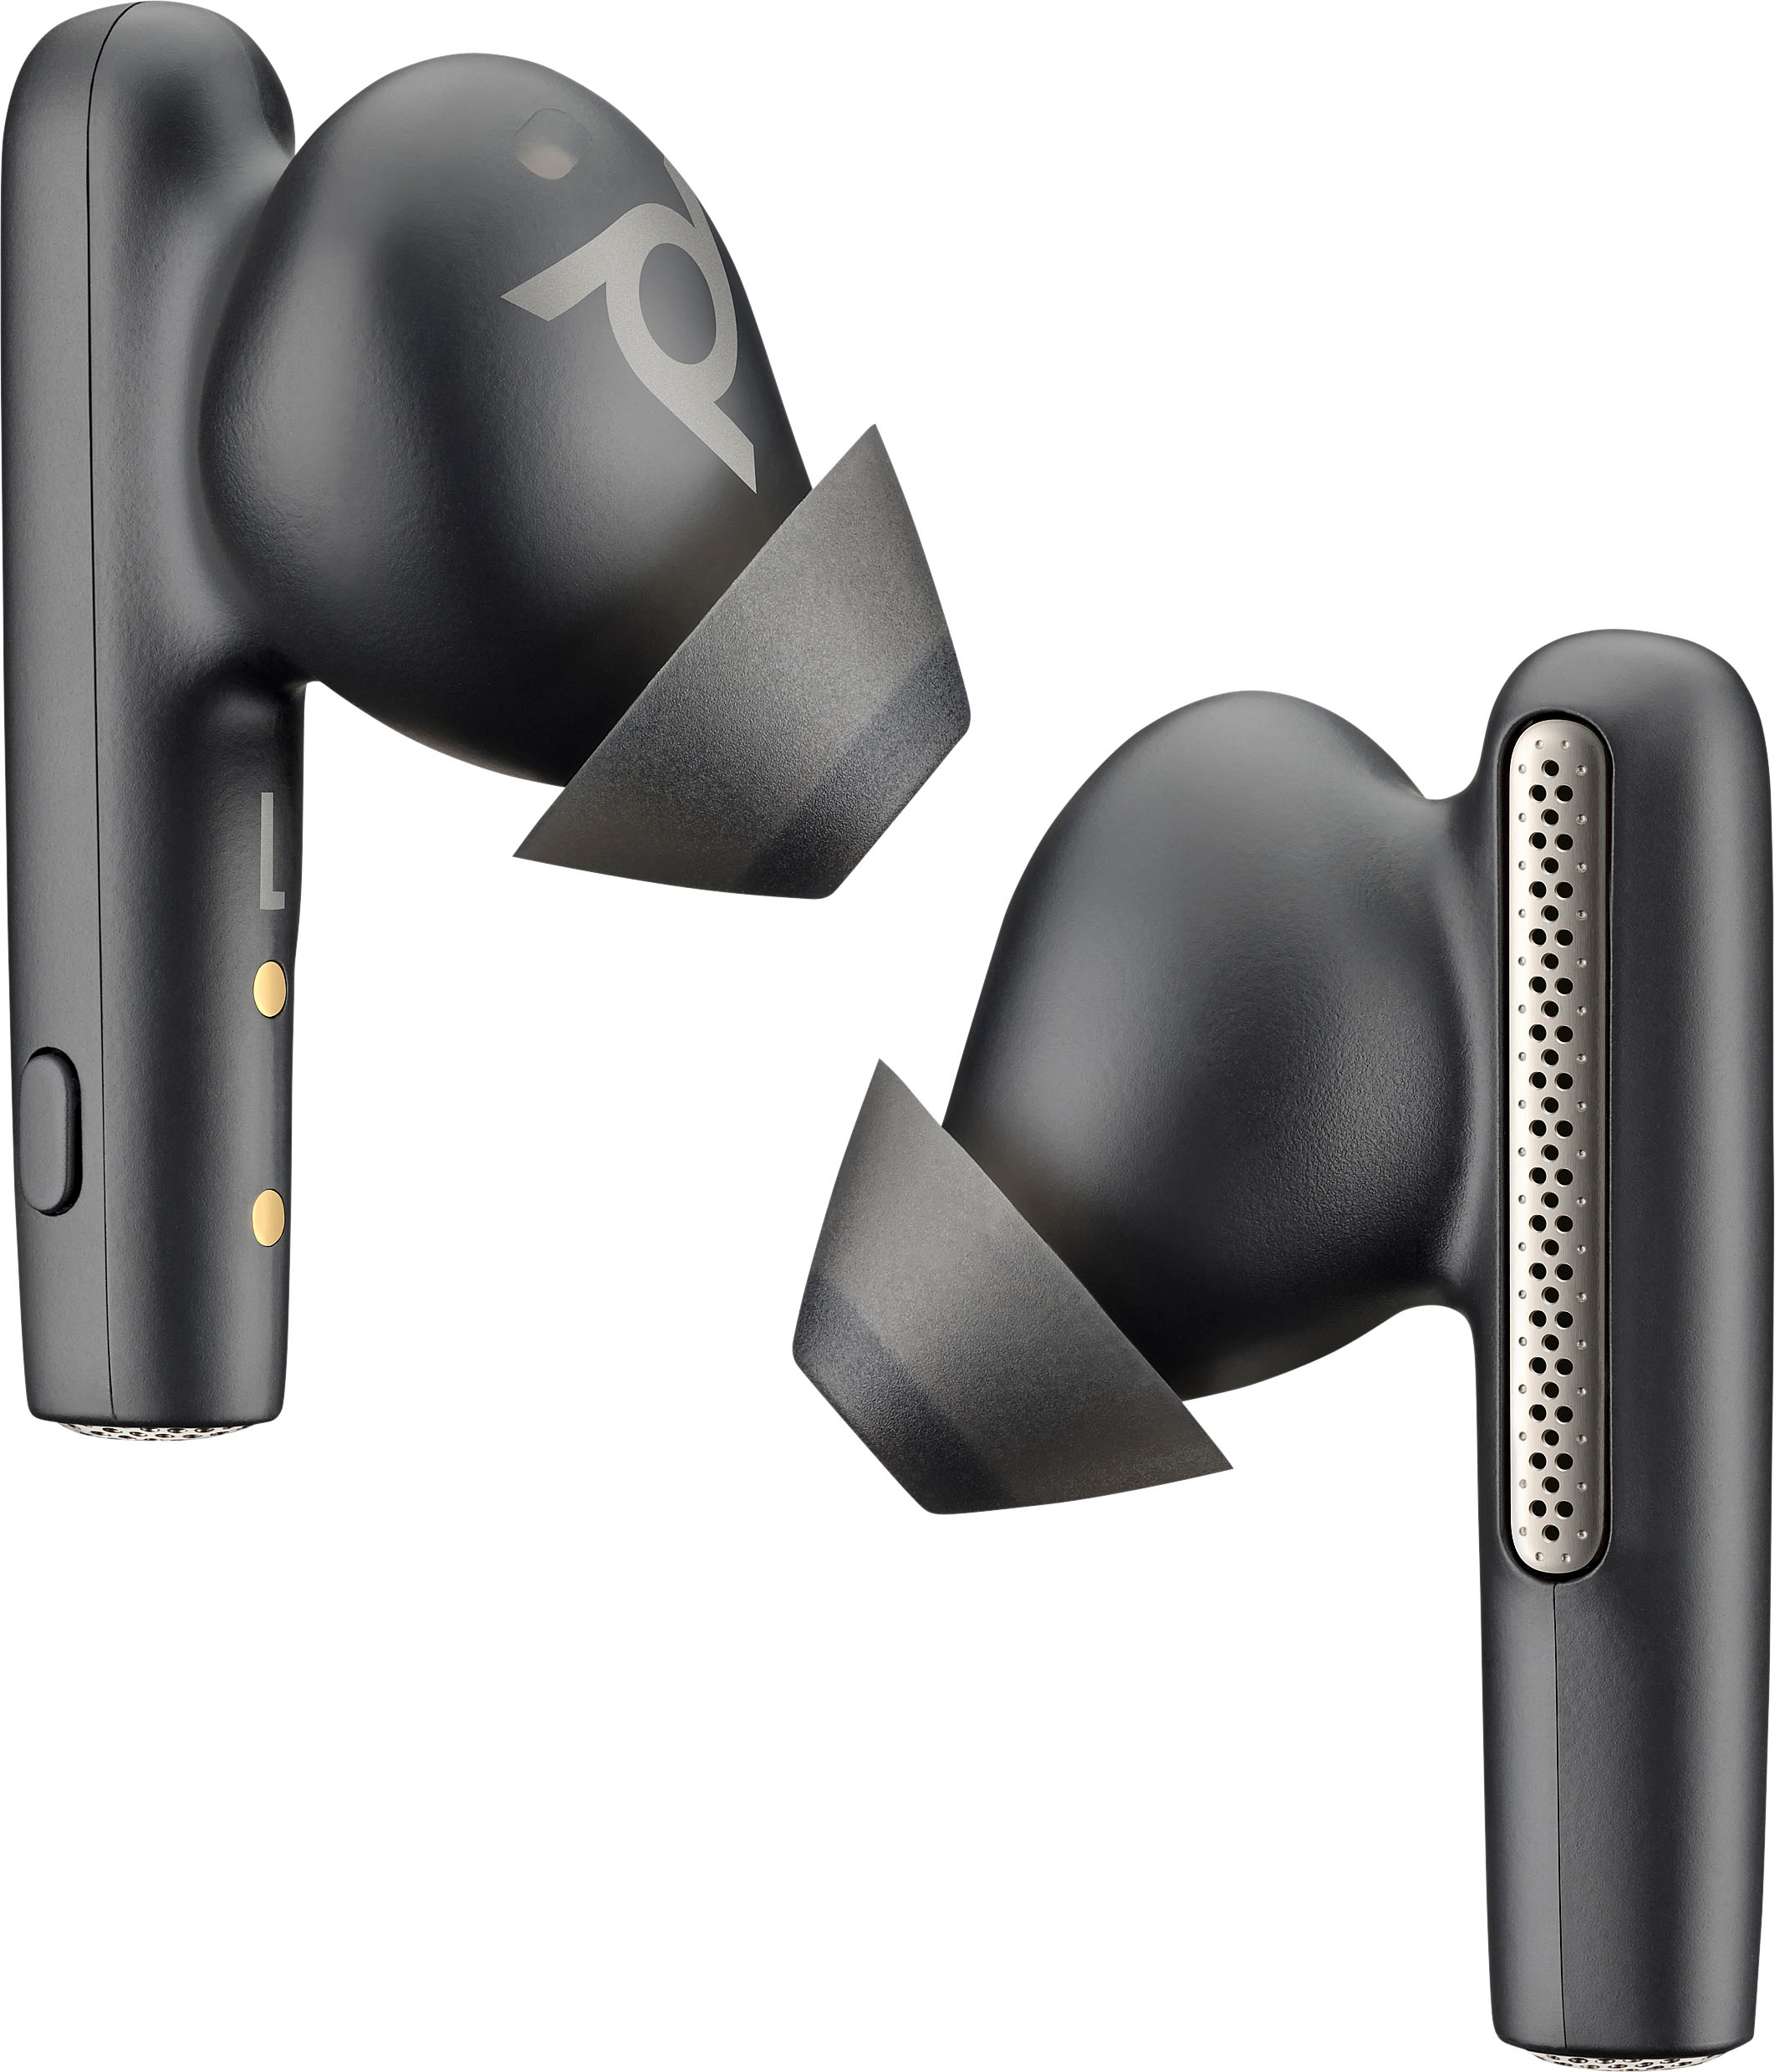 Canceling Buy Noise Best Poly 60 Black Active Free 60 - Free Earbuds formerly Plantronics with Voyager Voyager True Wireless